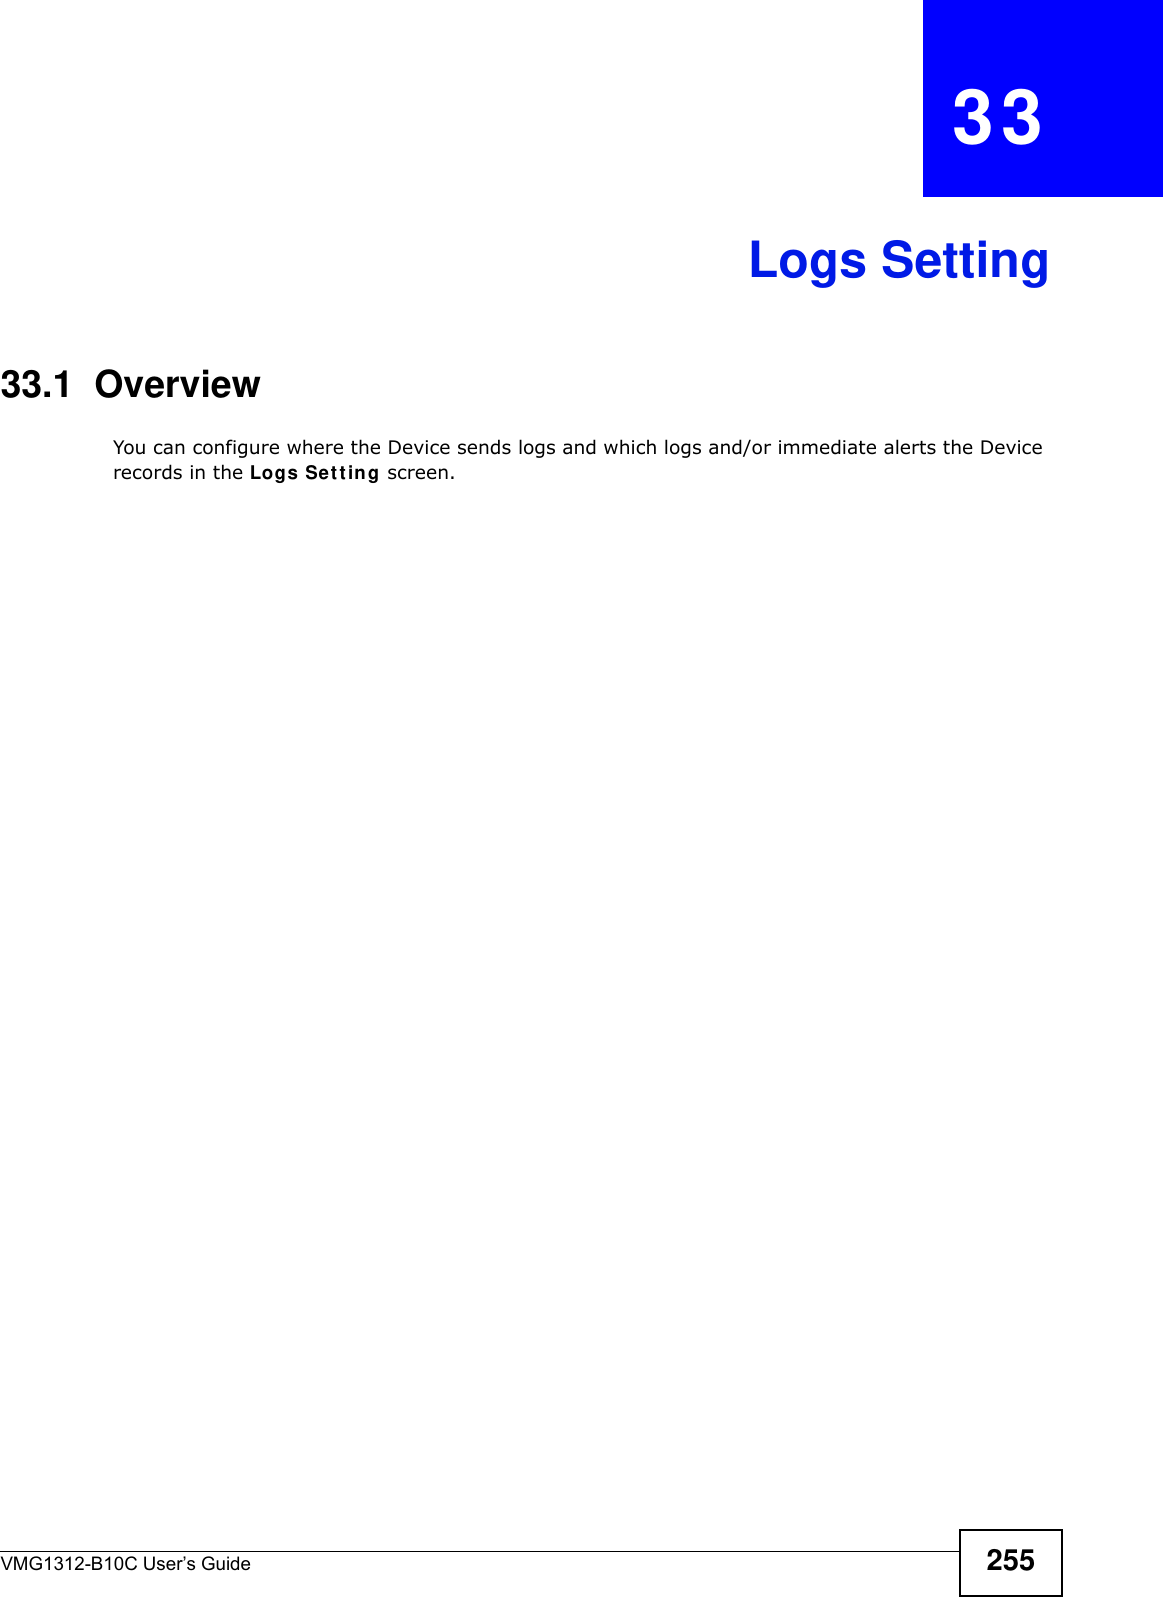 VMG1312-B10C User’s Guide 255CHAPTER   33Logs Setting33.1  Overview You can configure where the Device sends logs and which logs and/or immediate alerts the Device records in the Logs Se t t ing screen.